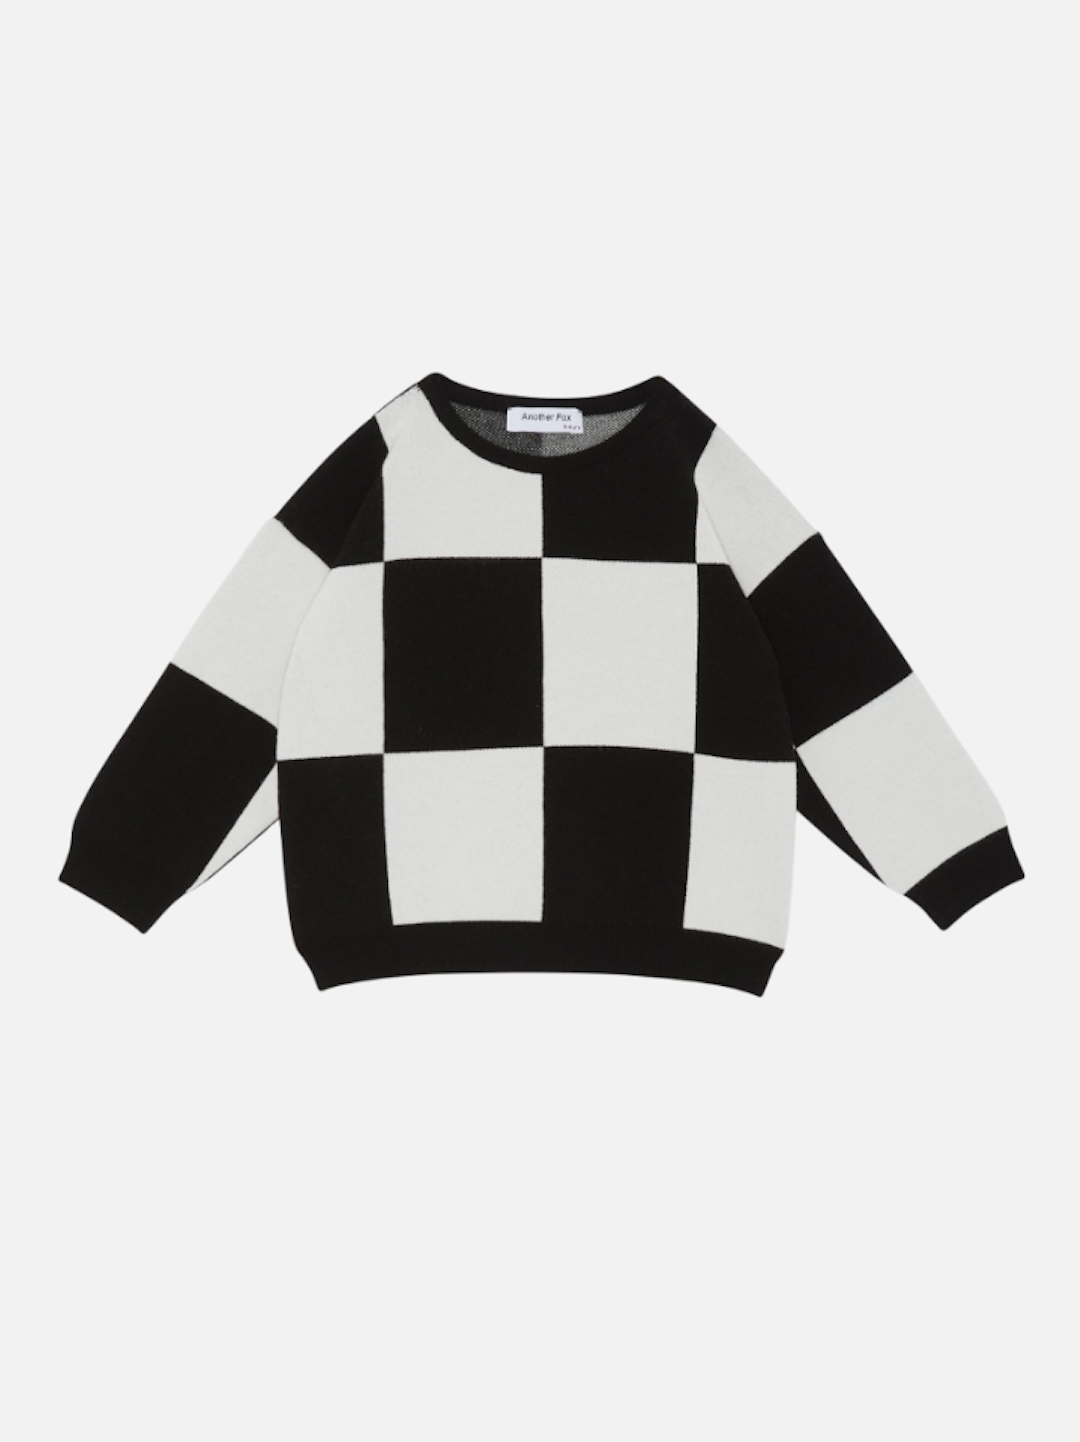 A kids' sweatshirt in a bold black and white checkerboard 